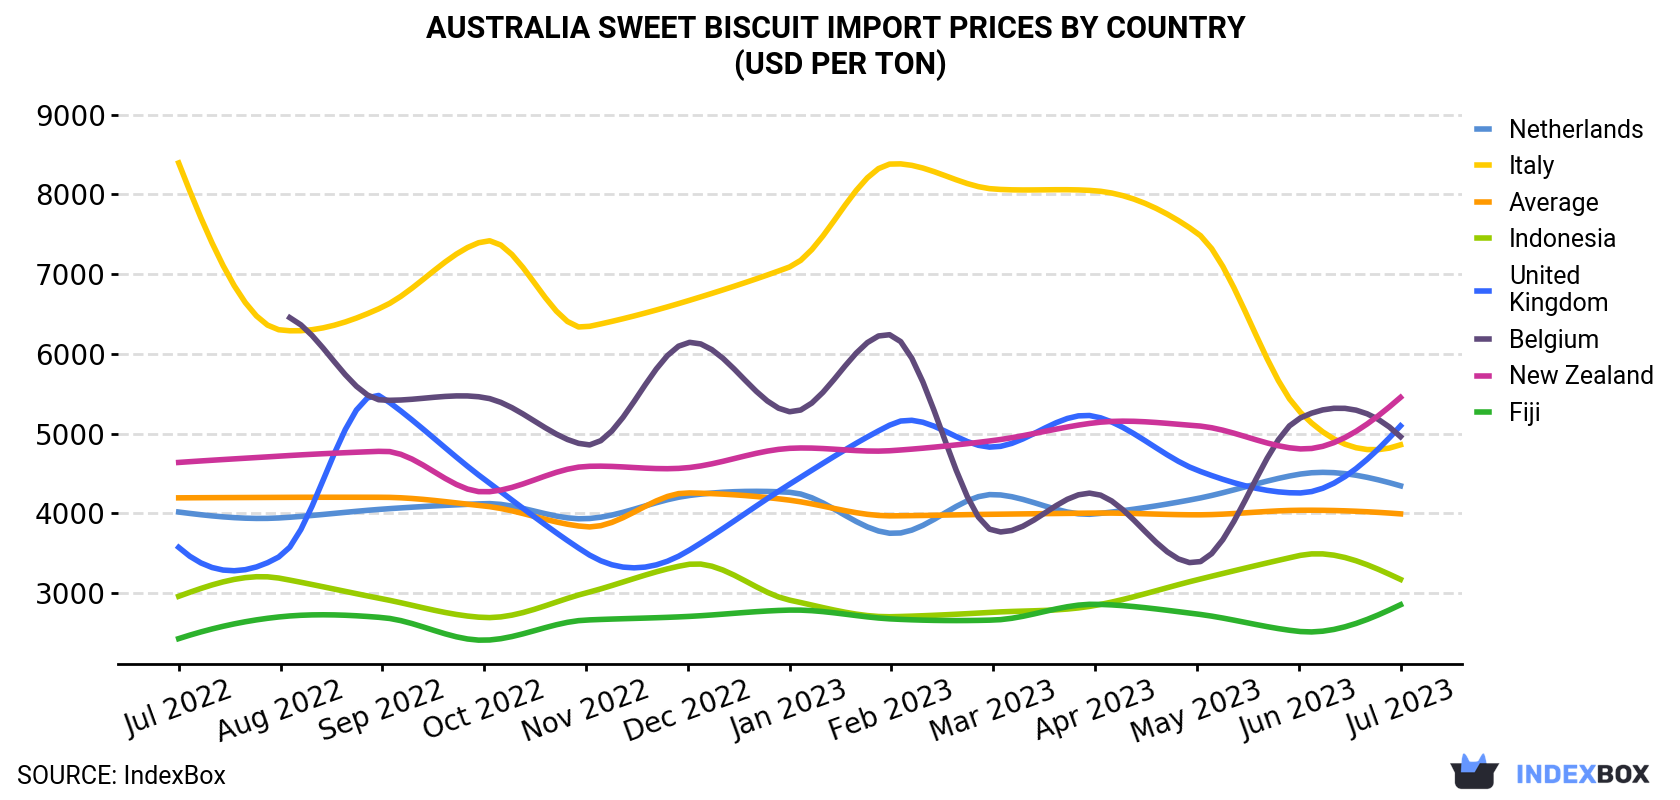 Australia Sweet Biscuit Import Prices By Country (USD Per Ton)